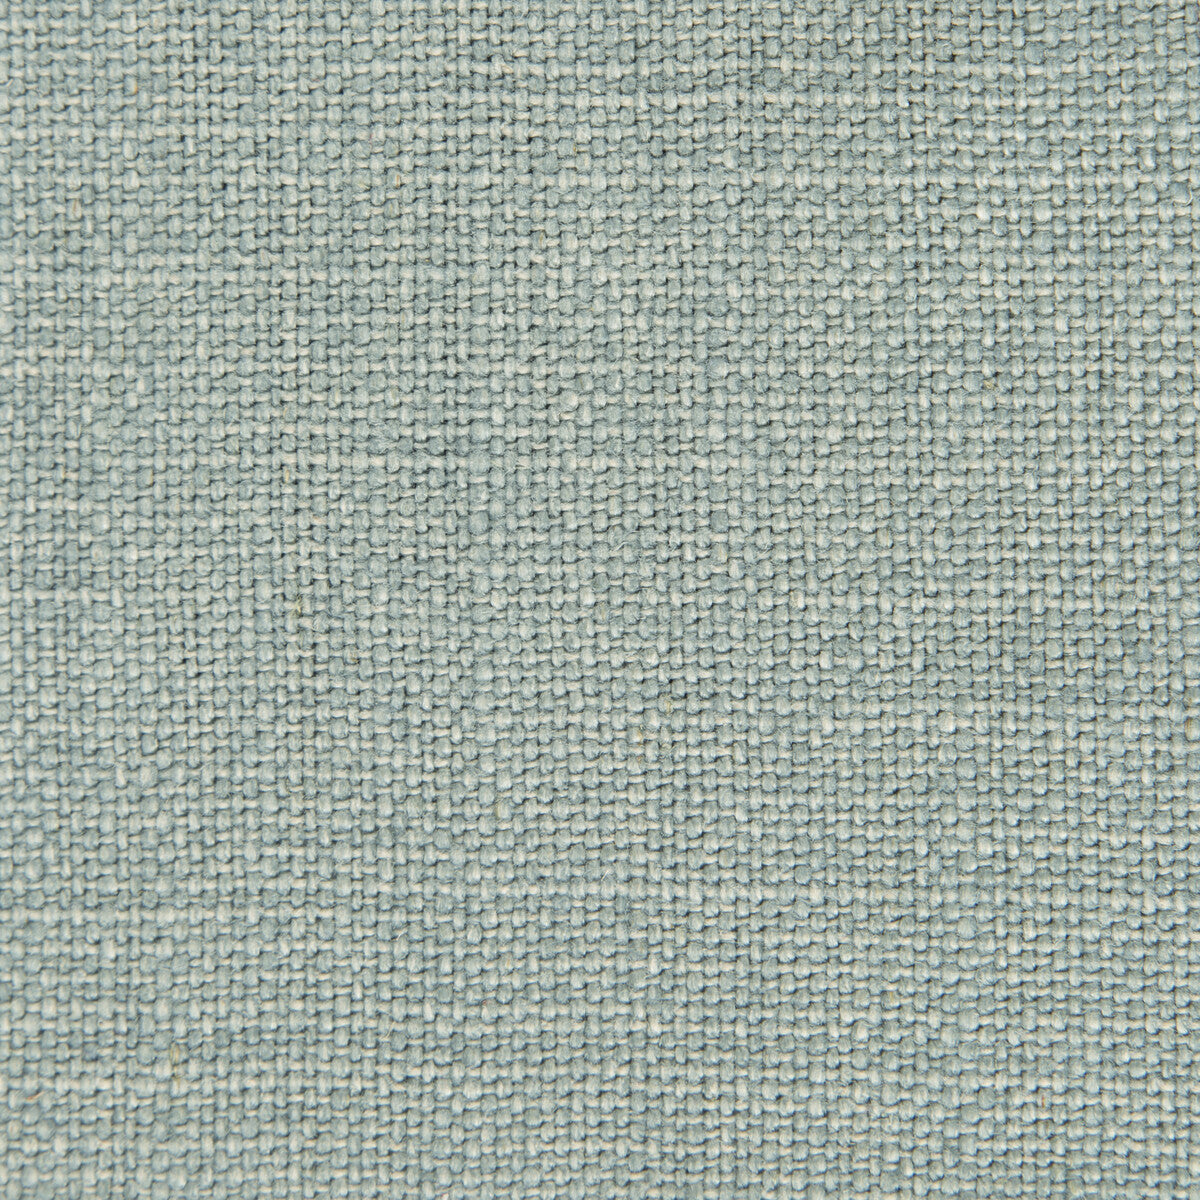 Nicaragua fabric in azul claro color - pattern GDT5239.013.0 - by Gaston y Daniela in the Basics collection